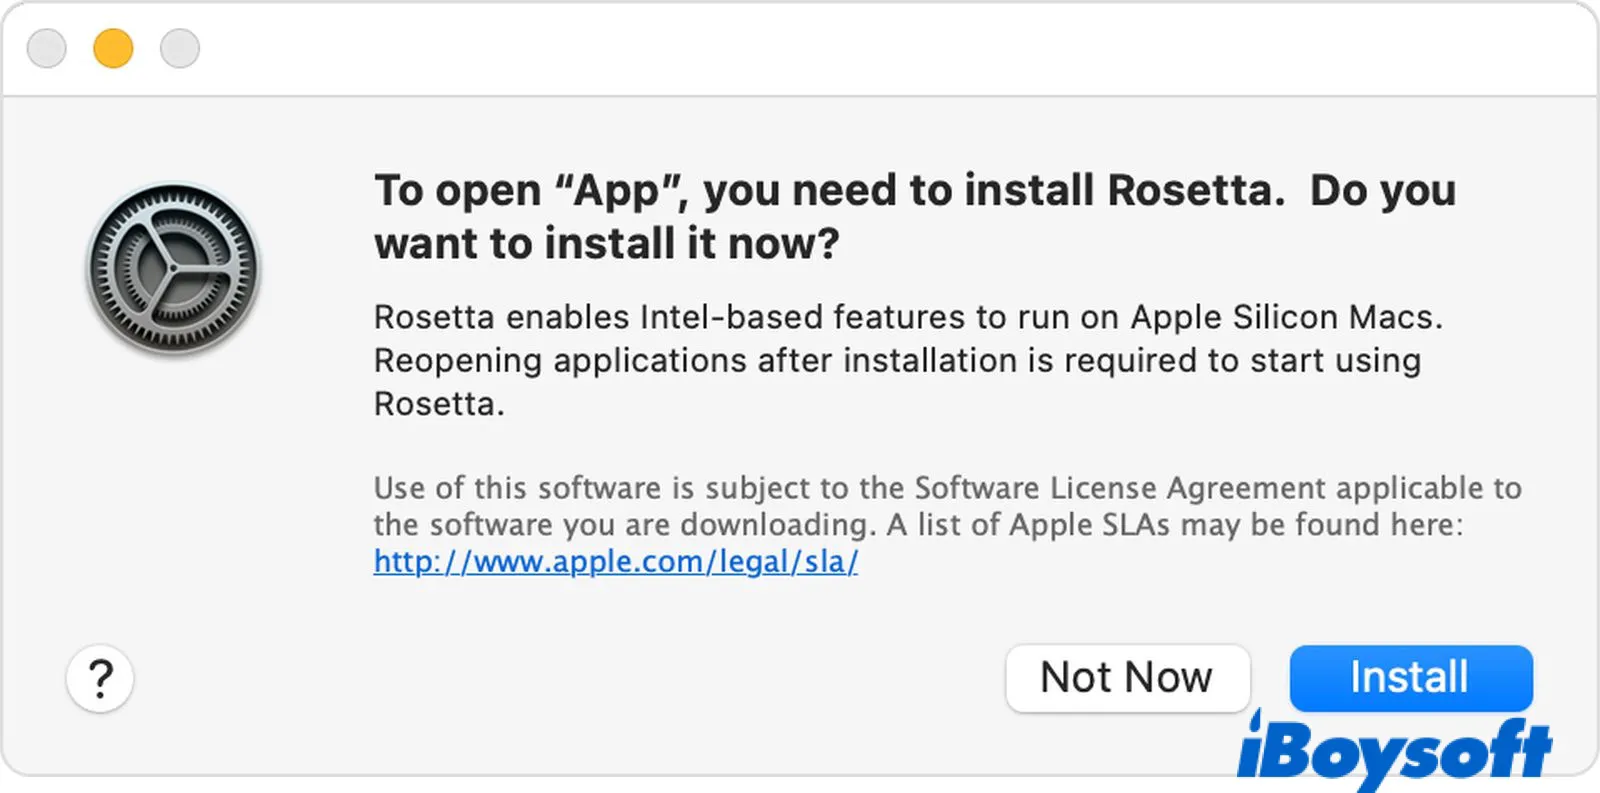 The notification asking you to install Rosetta 2 when opening an app for Intel Macs